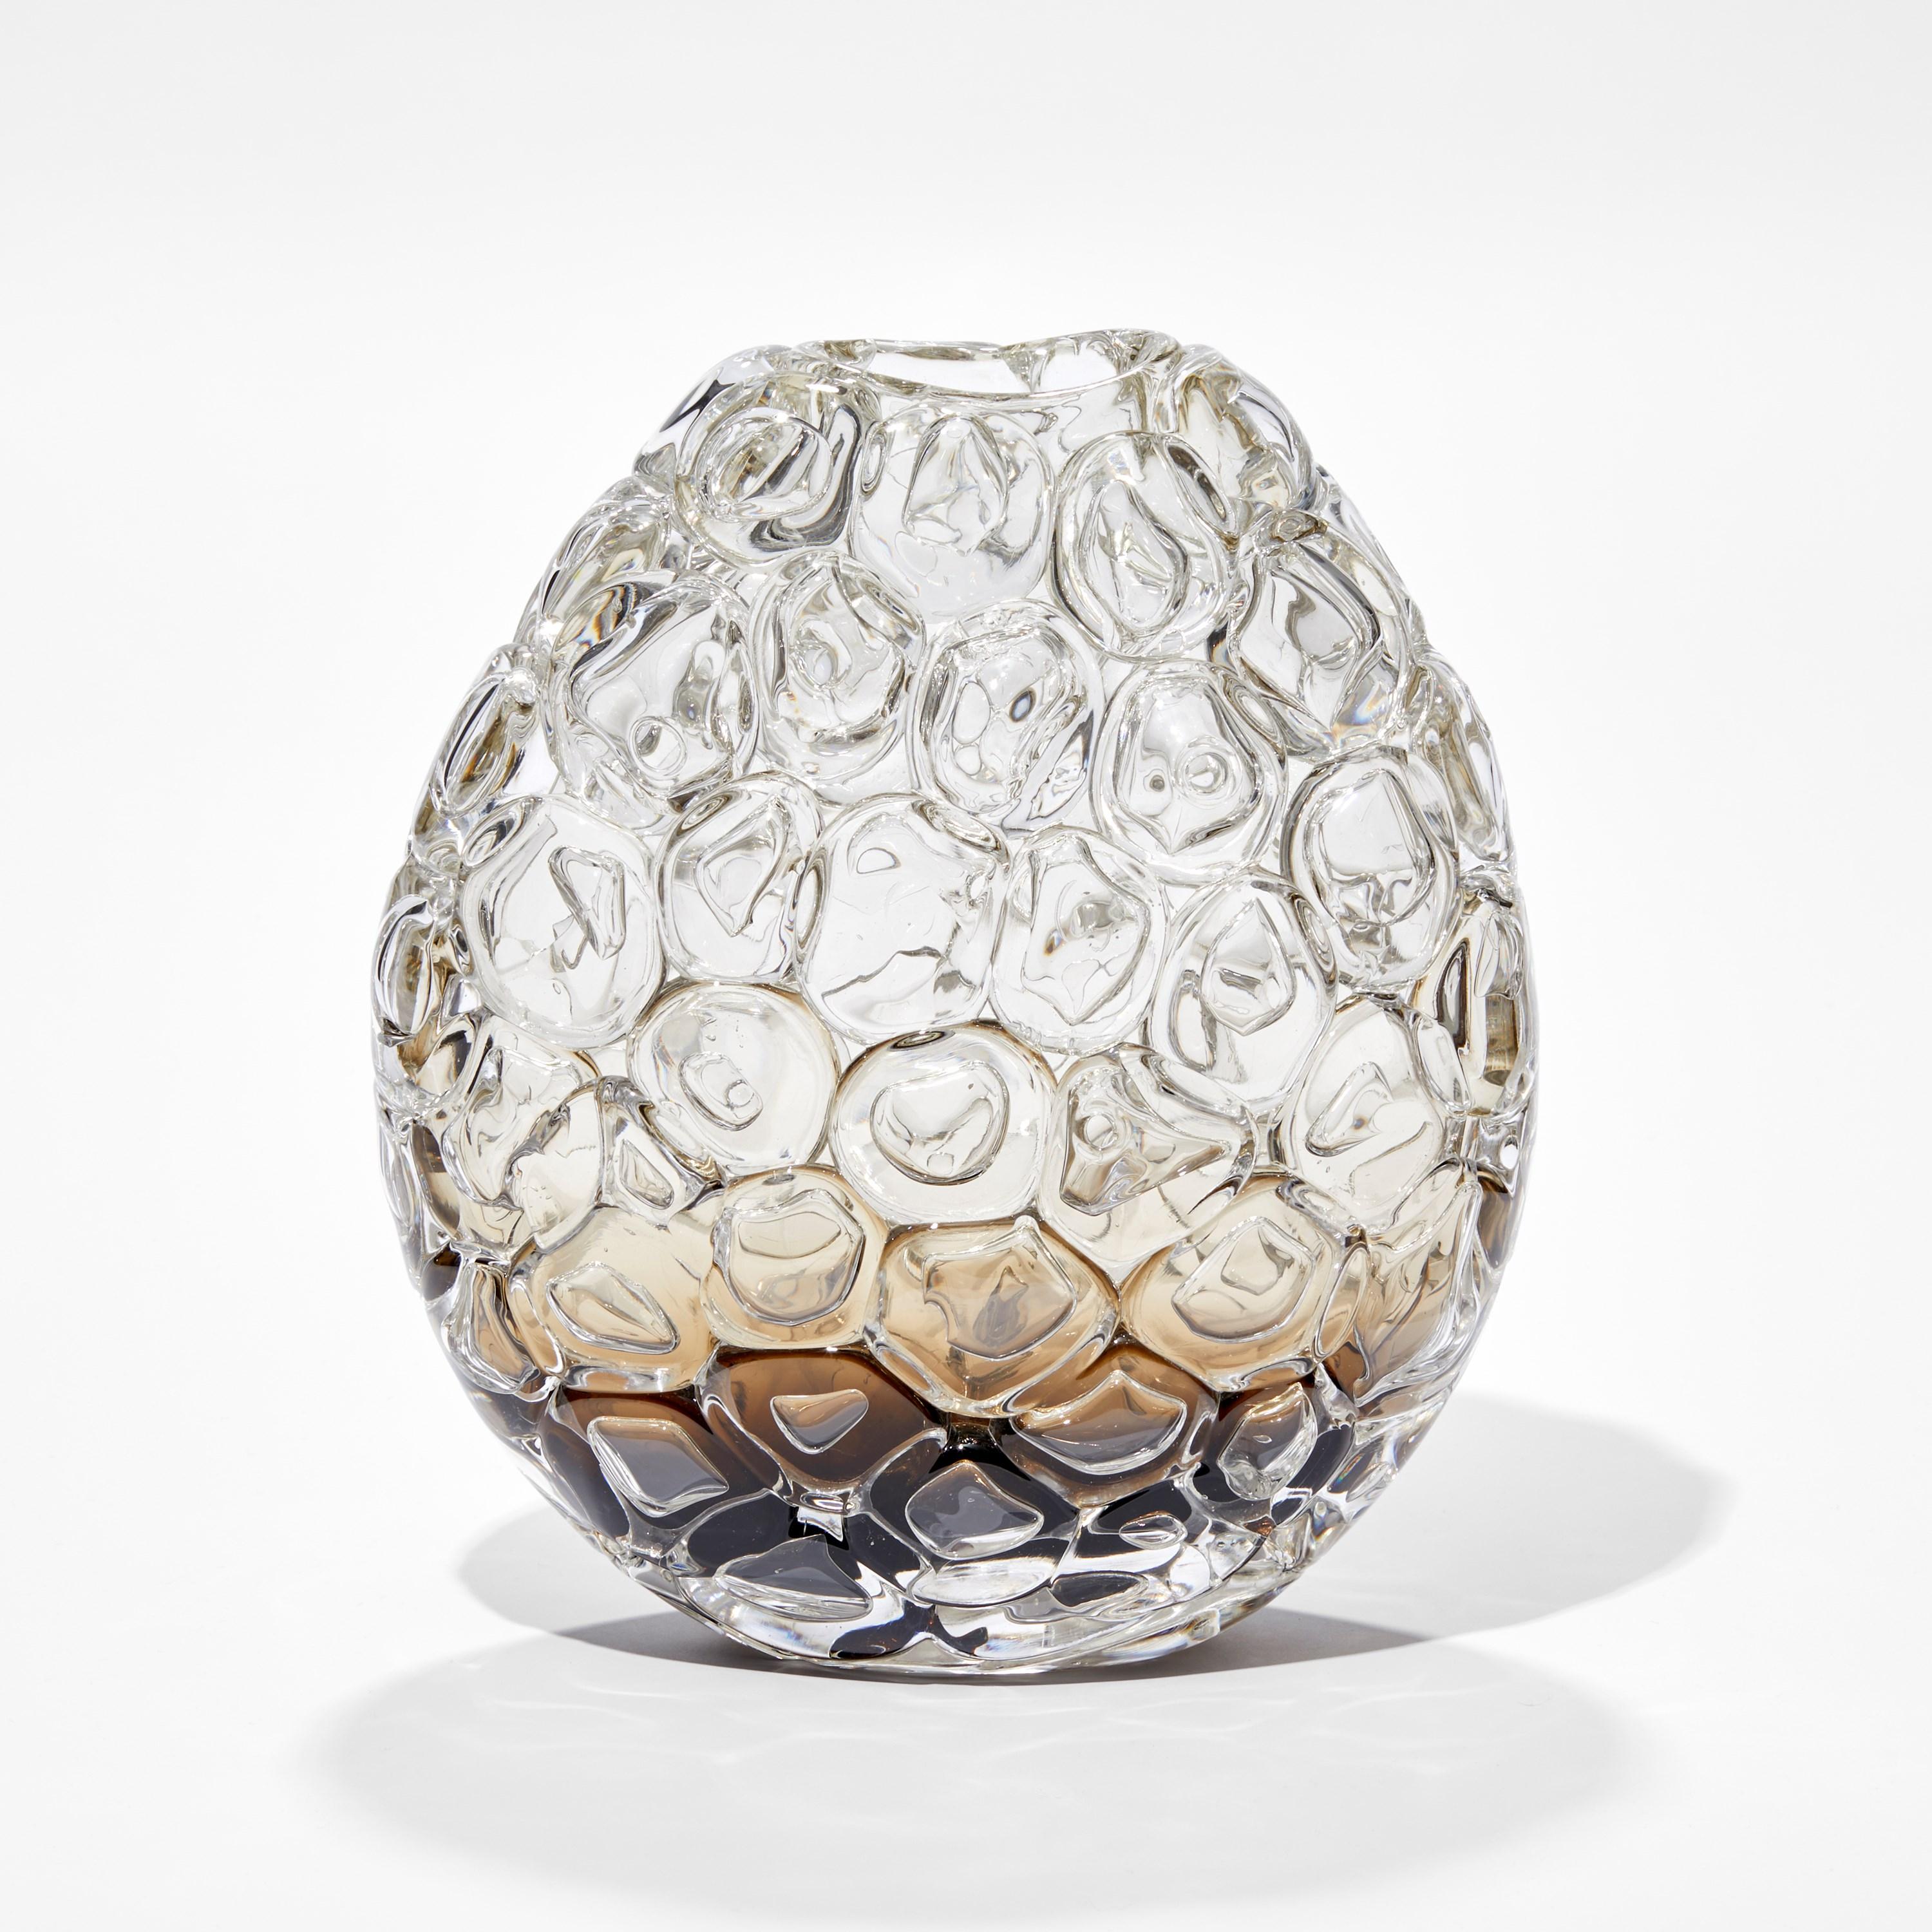 'Bubblewrap in Olivin Ombre II' is a handblown and sculpted vase created from glass by the British artist, Allister Malcolm.

Playful yet elegant, Malcolm has formed oversized bubbles on the exterior of this handcrafted and blown piece. The title